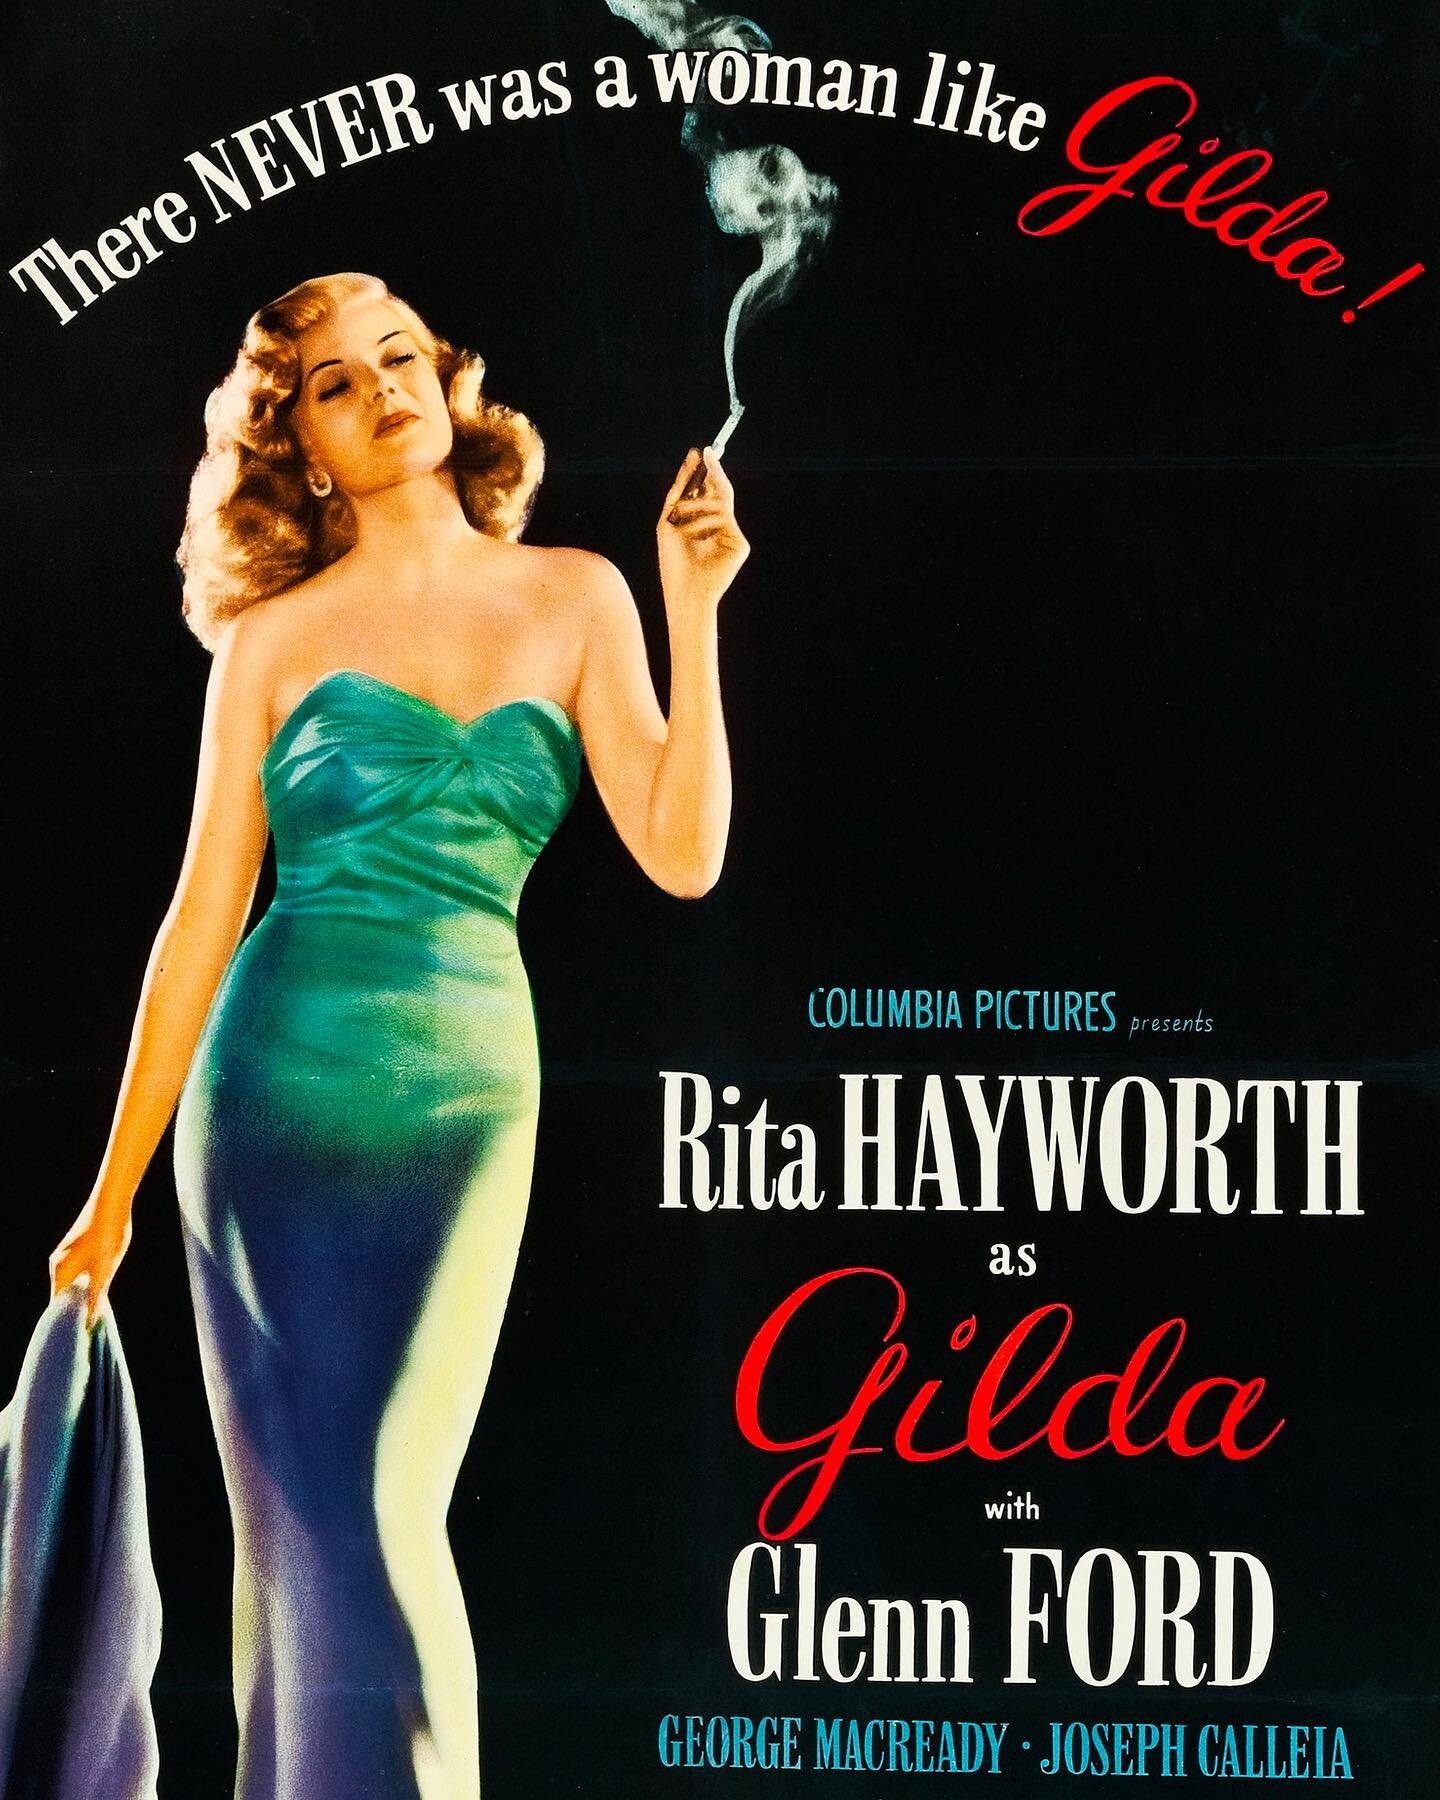 Silver Screen September Spotlight: Gilda, 1941.

Here we go, another recommendation from Nat. 

Gilda, directed by Charles Vidor is one of the best films of the era. There is no film from the era that is quite like Gilda&hellip;full of highly-charged